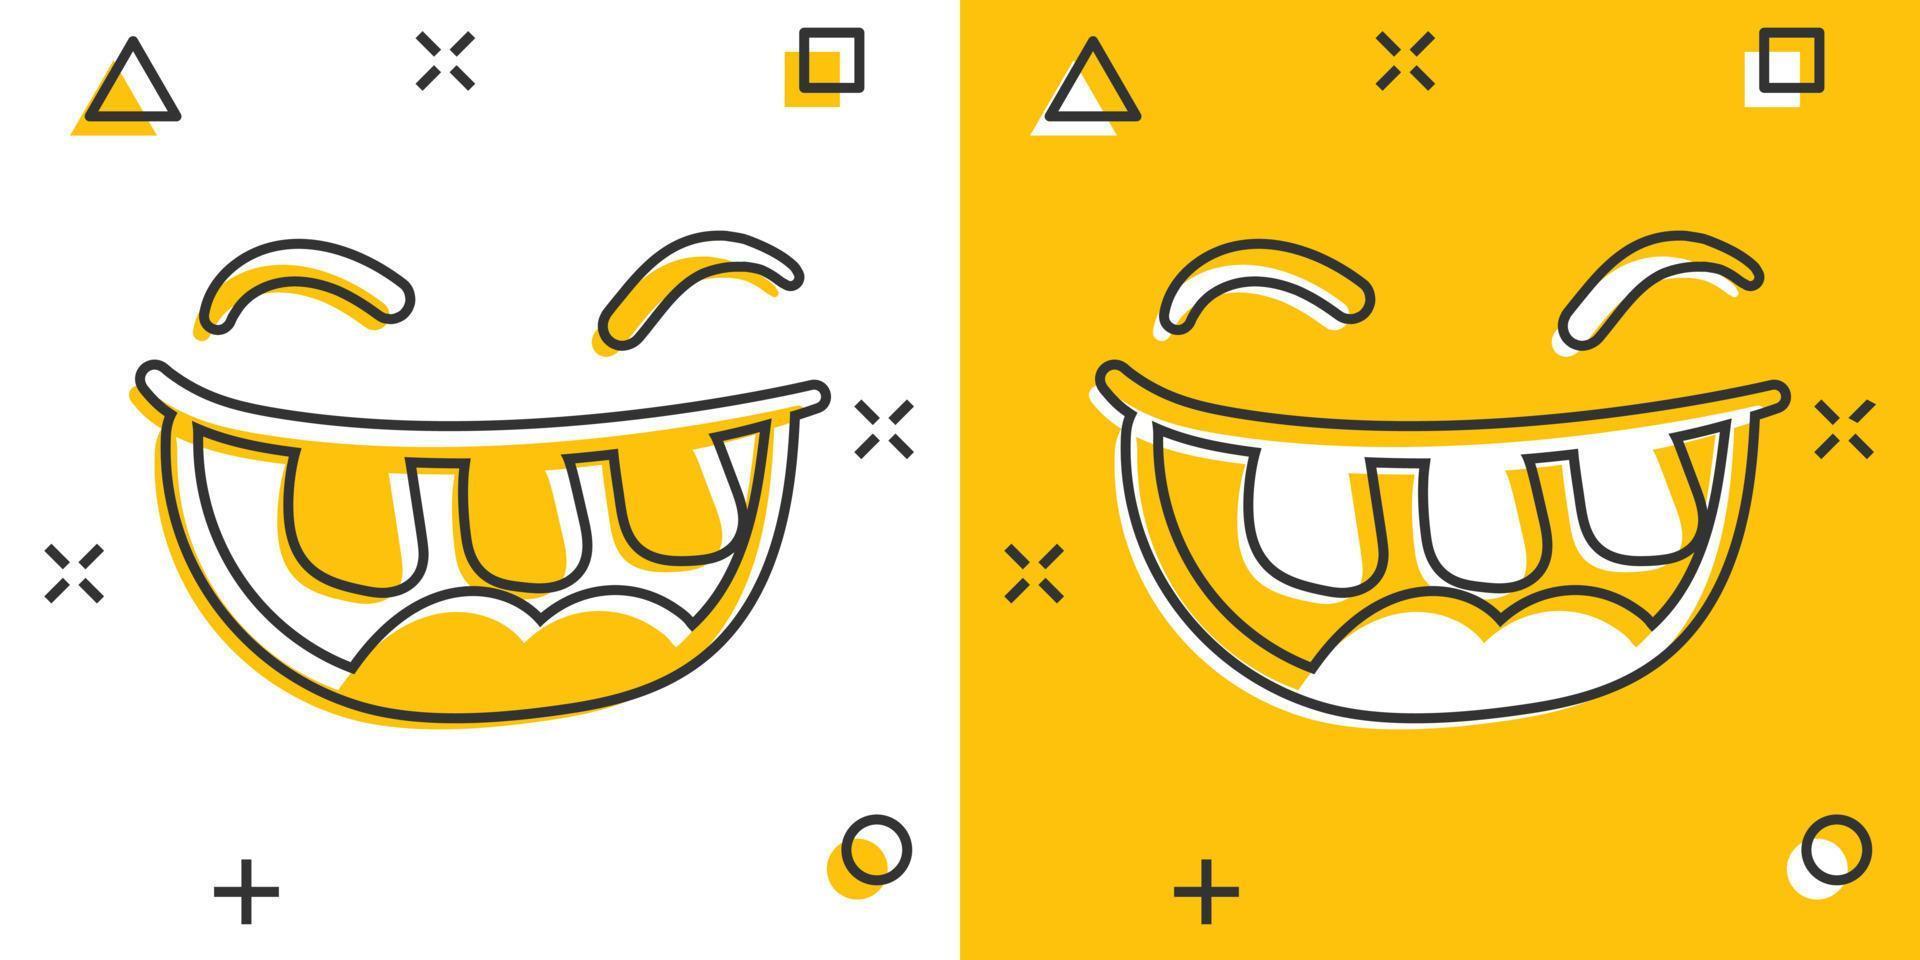 Vector cartoon smile with tongue icon in comic style. Smile face sign illustration pictogram. Funny face business splash effect concept.